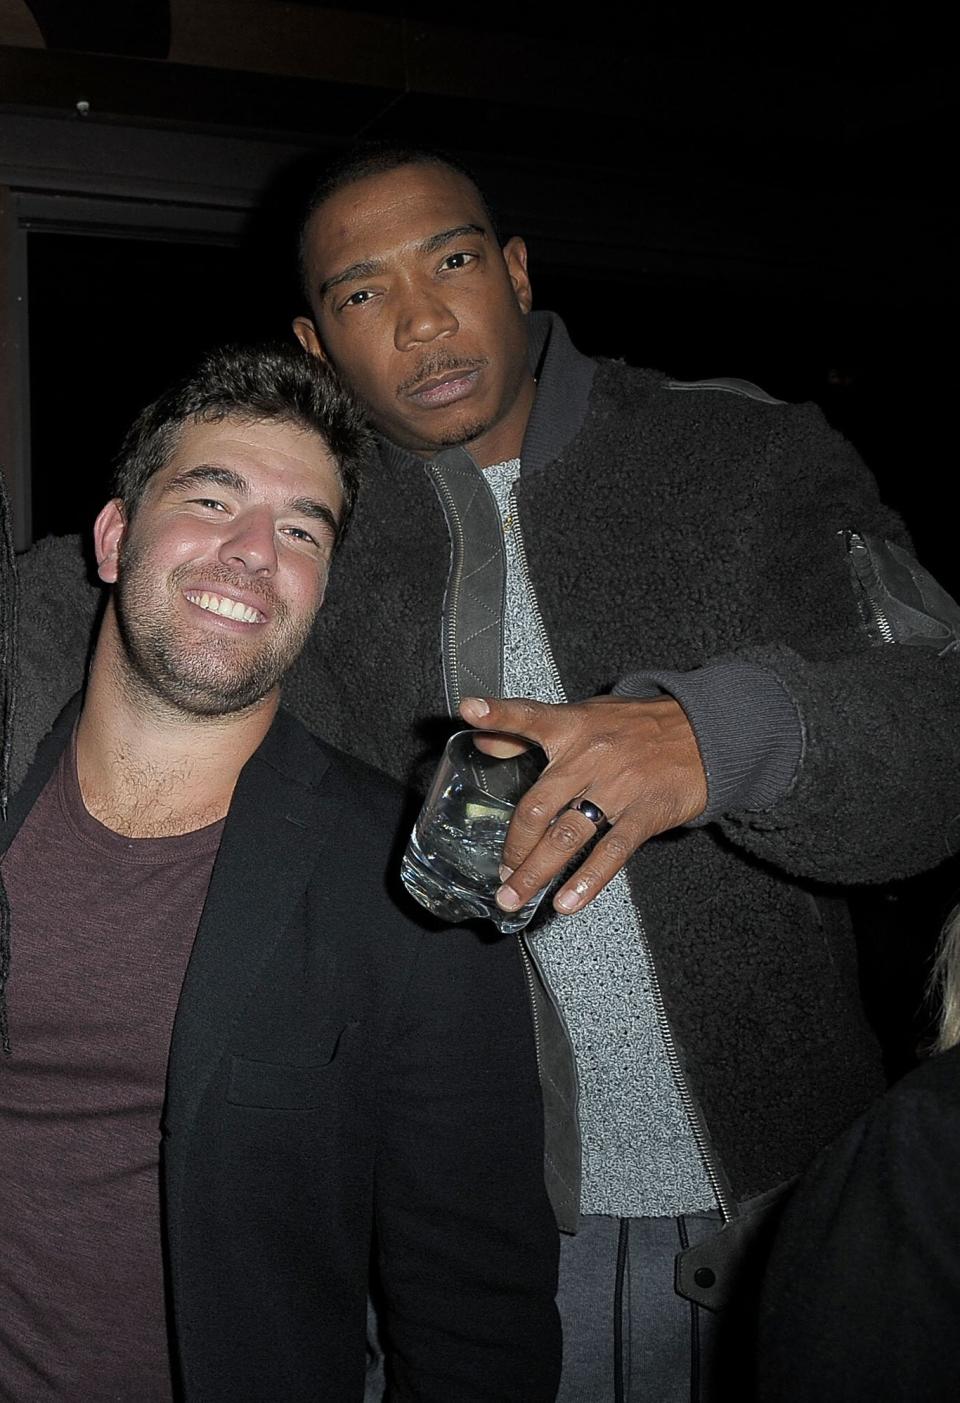 Ja Rule and Billy McFarland together at an event.&nbsp; (Photo: Chance Yeh via Getty Images)